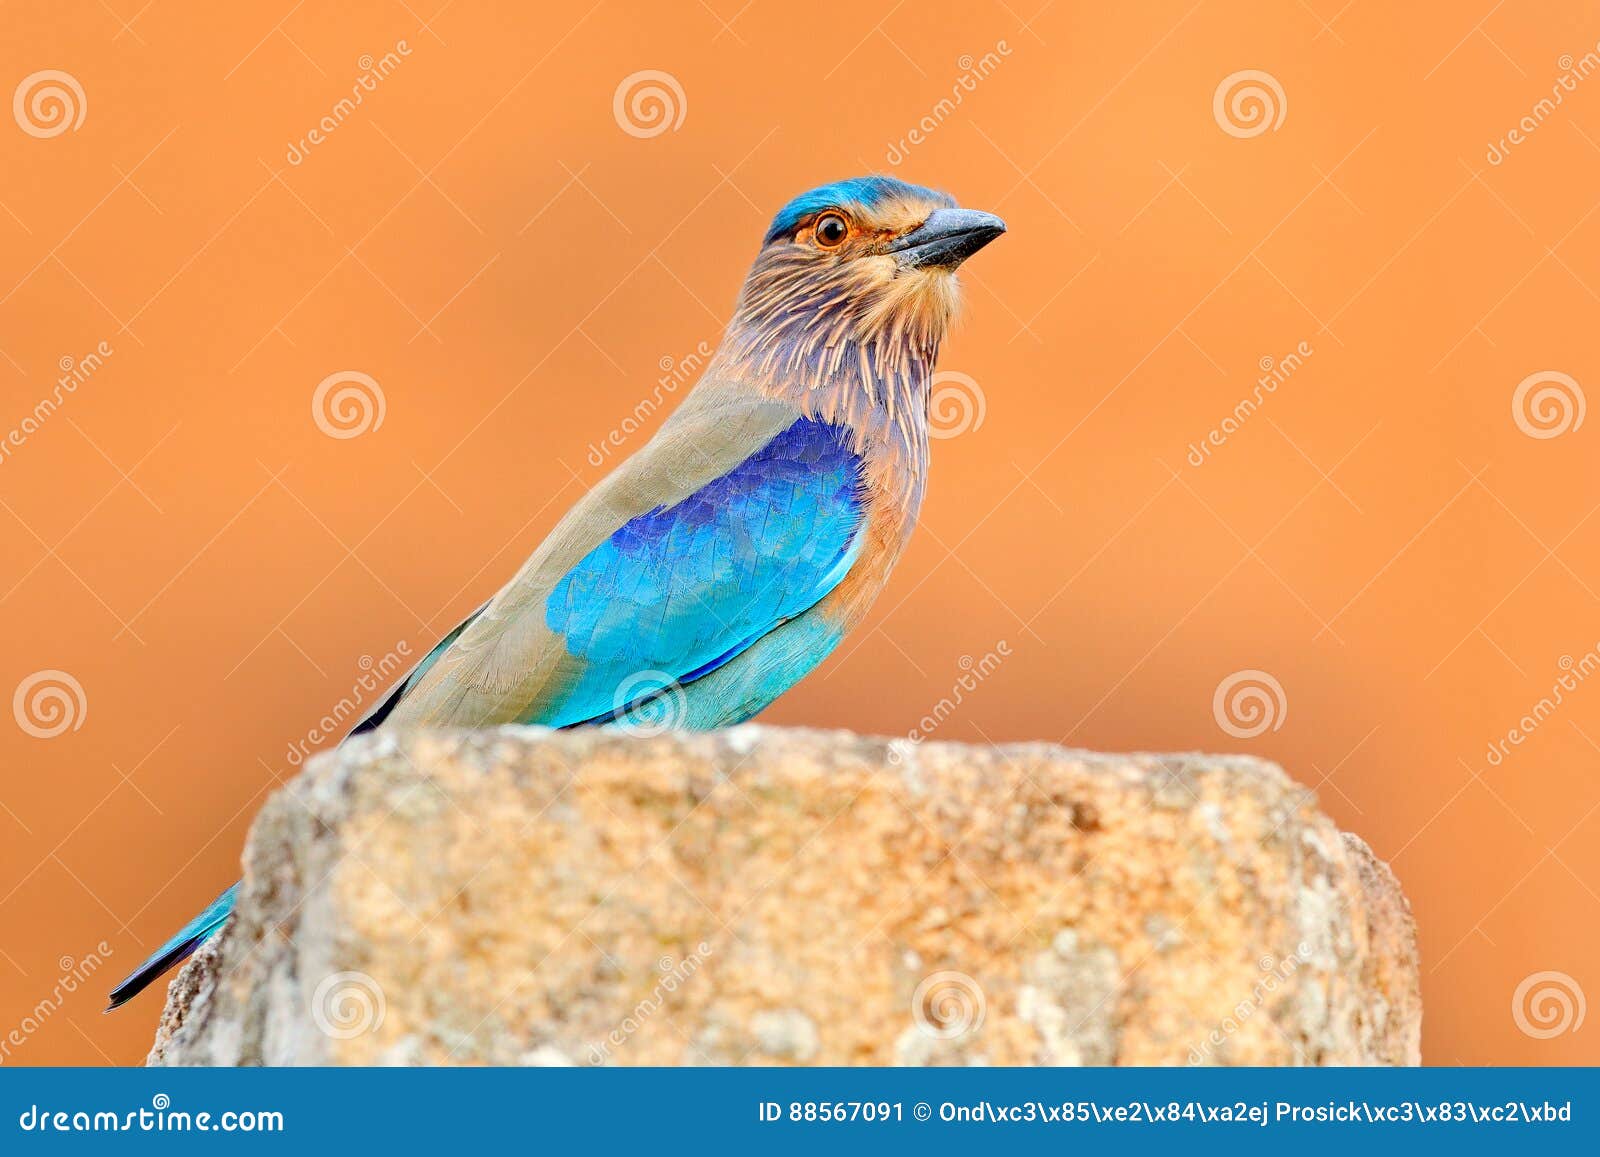 nice colour light blue bird indian roller sitting on the stone with orange background. birdwatching in asia. beautiful colour bir